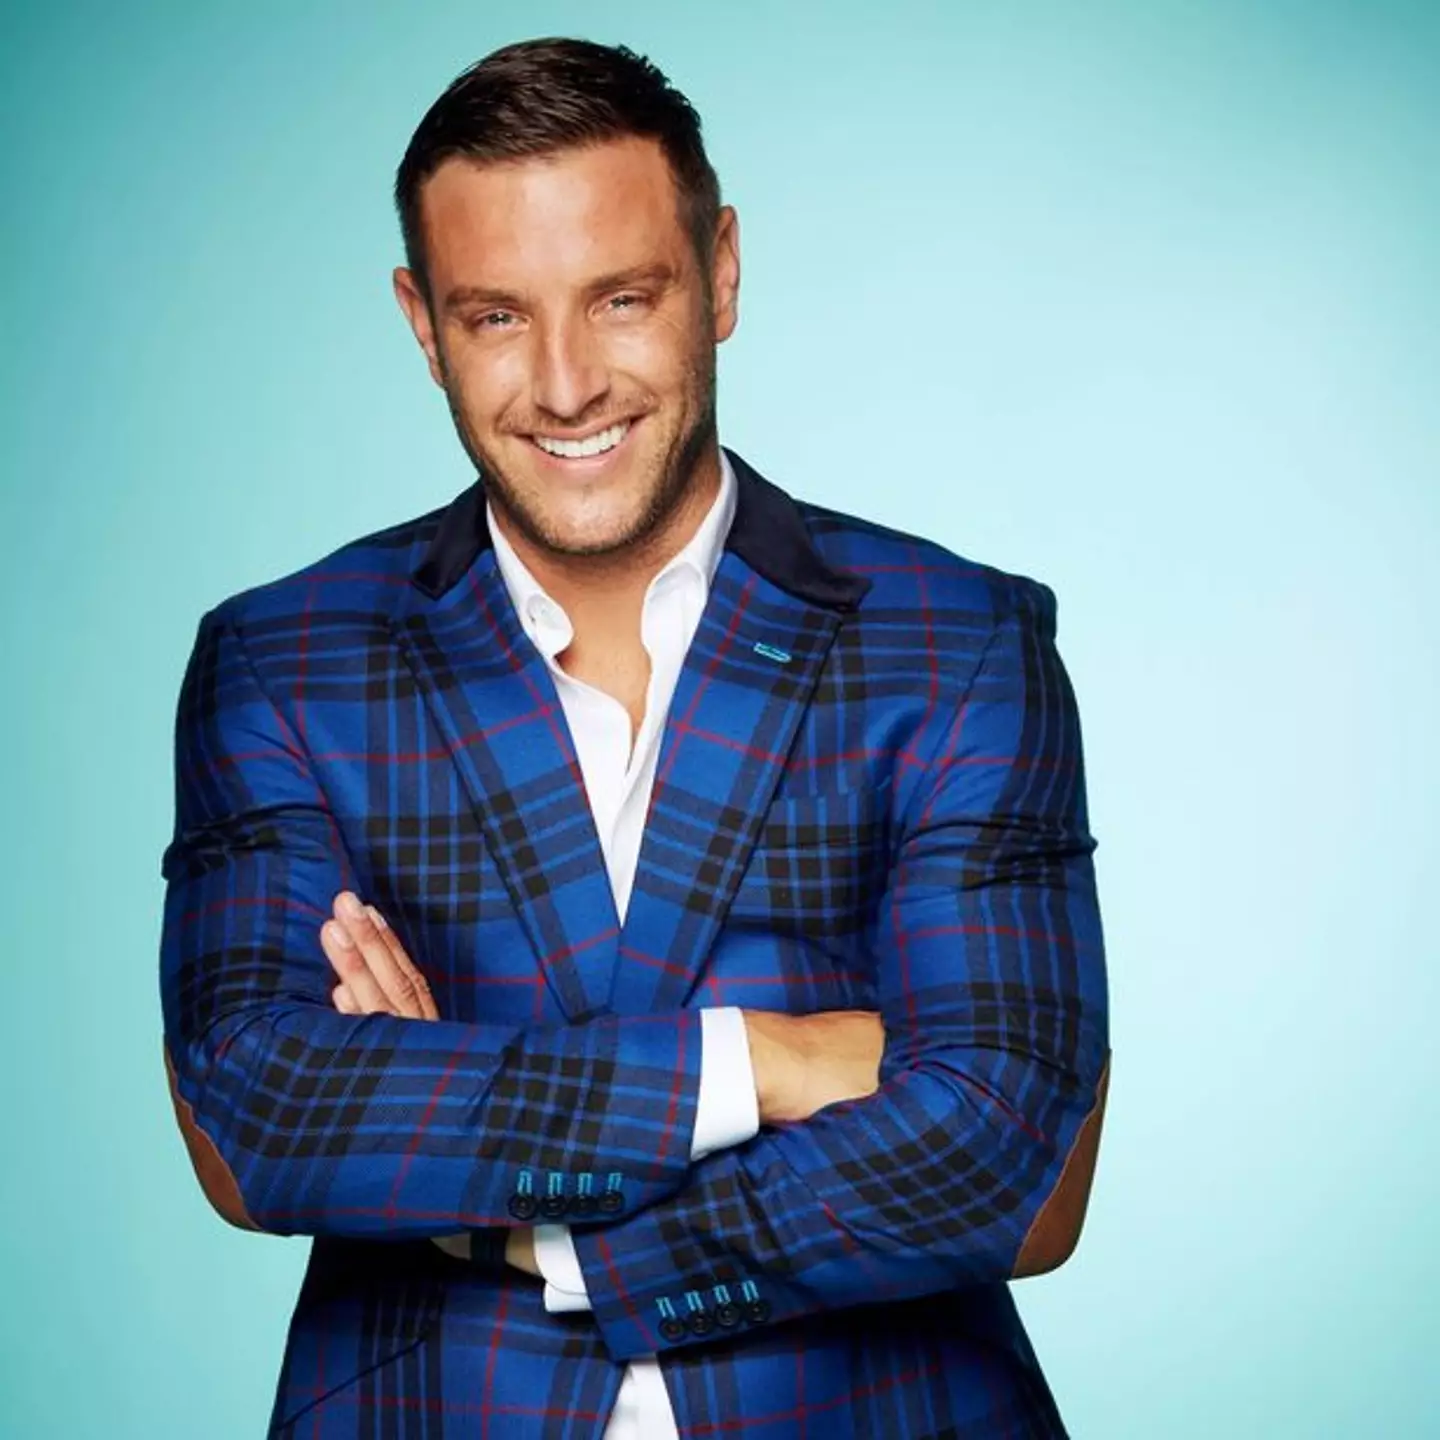 Elliott Wright is a former TOWIE cast member and owner of Olivia's restaurant.